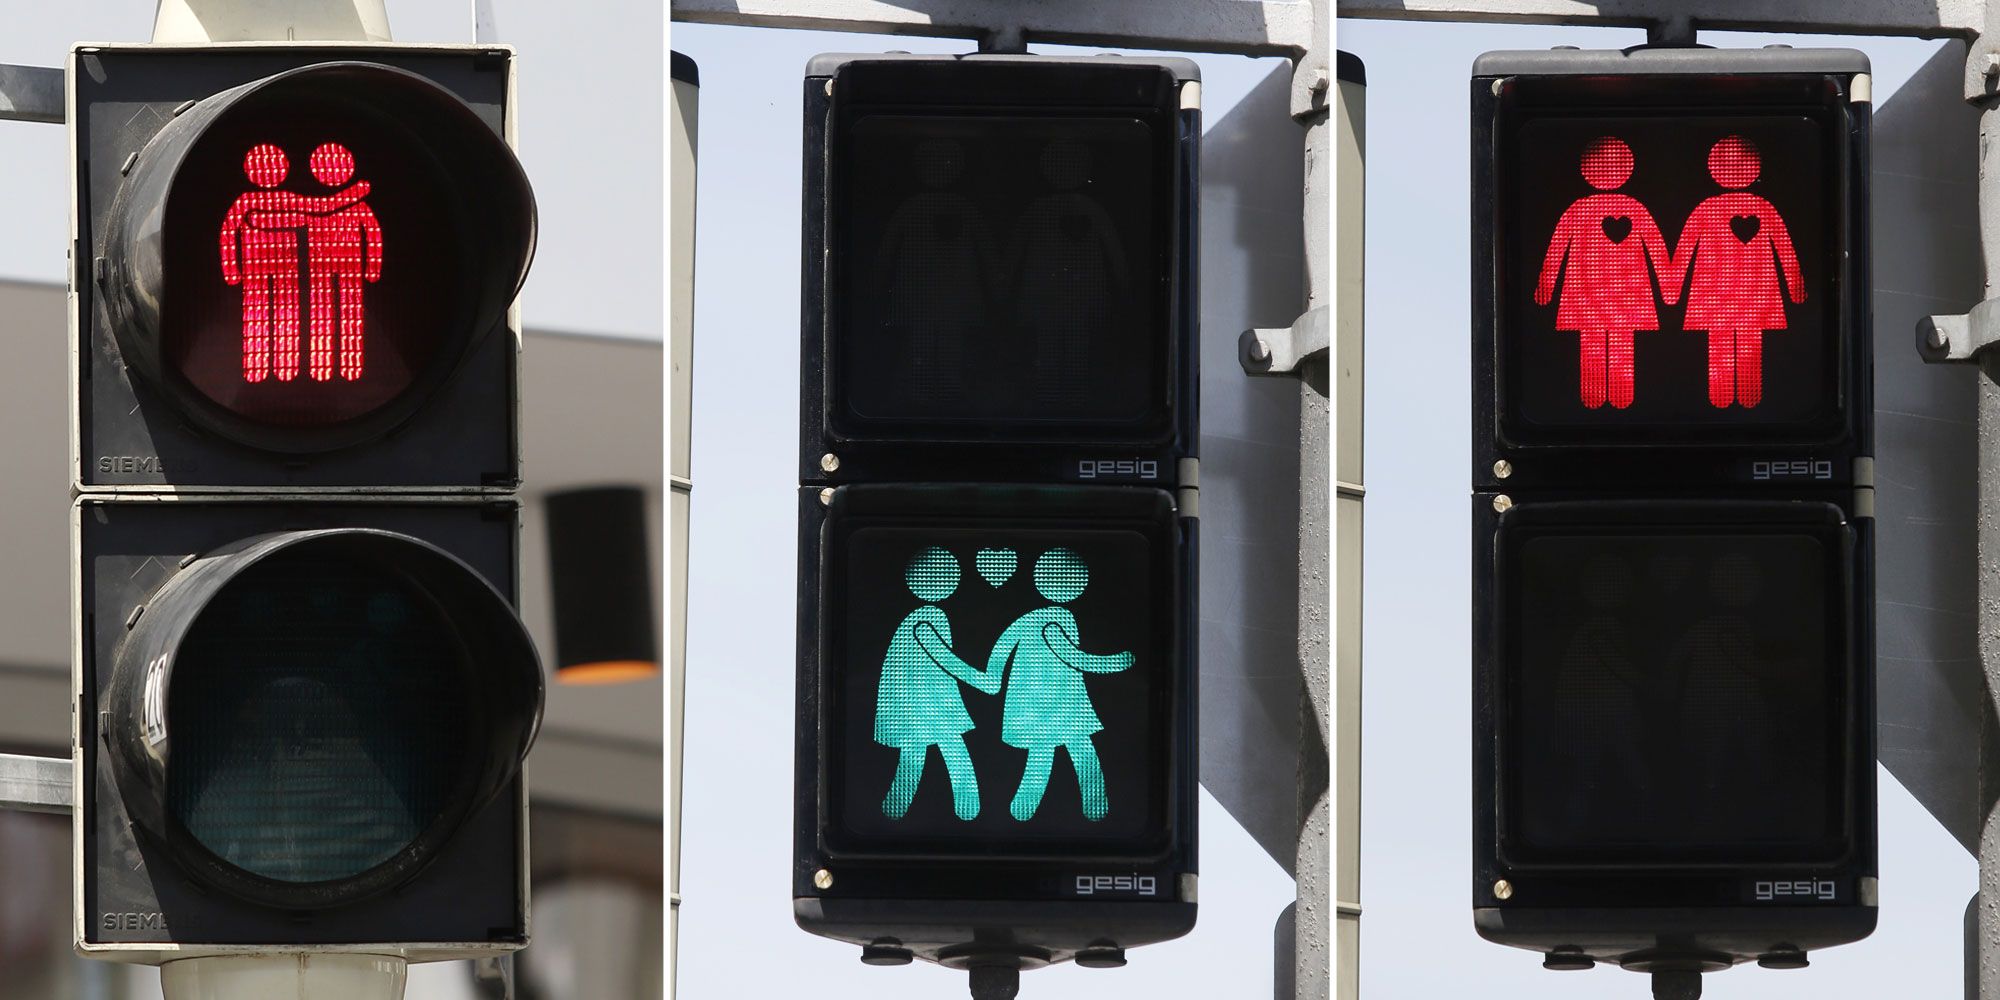 City Just Replaced Little Men on Traffic Lights With Adorable LGBT